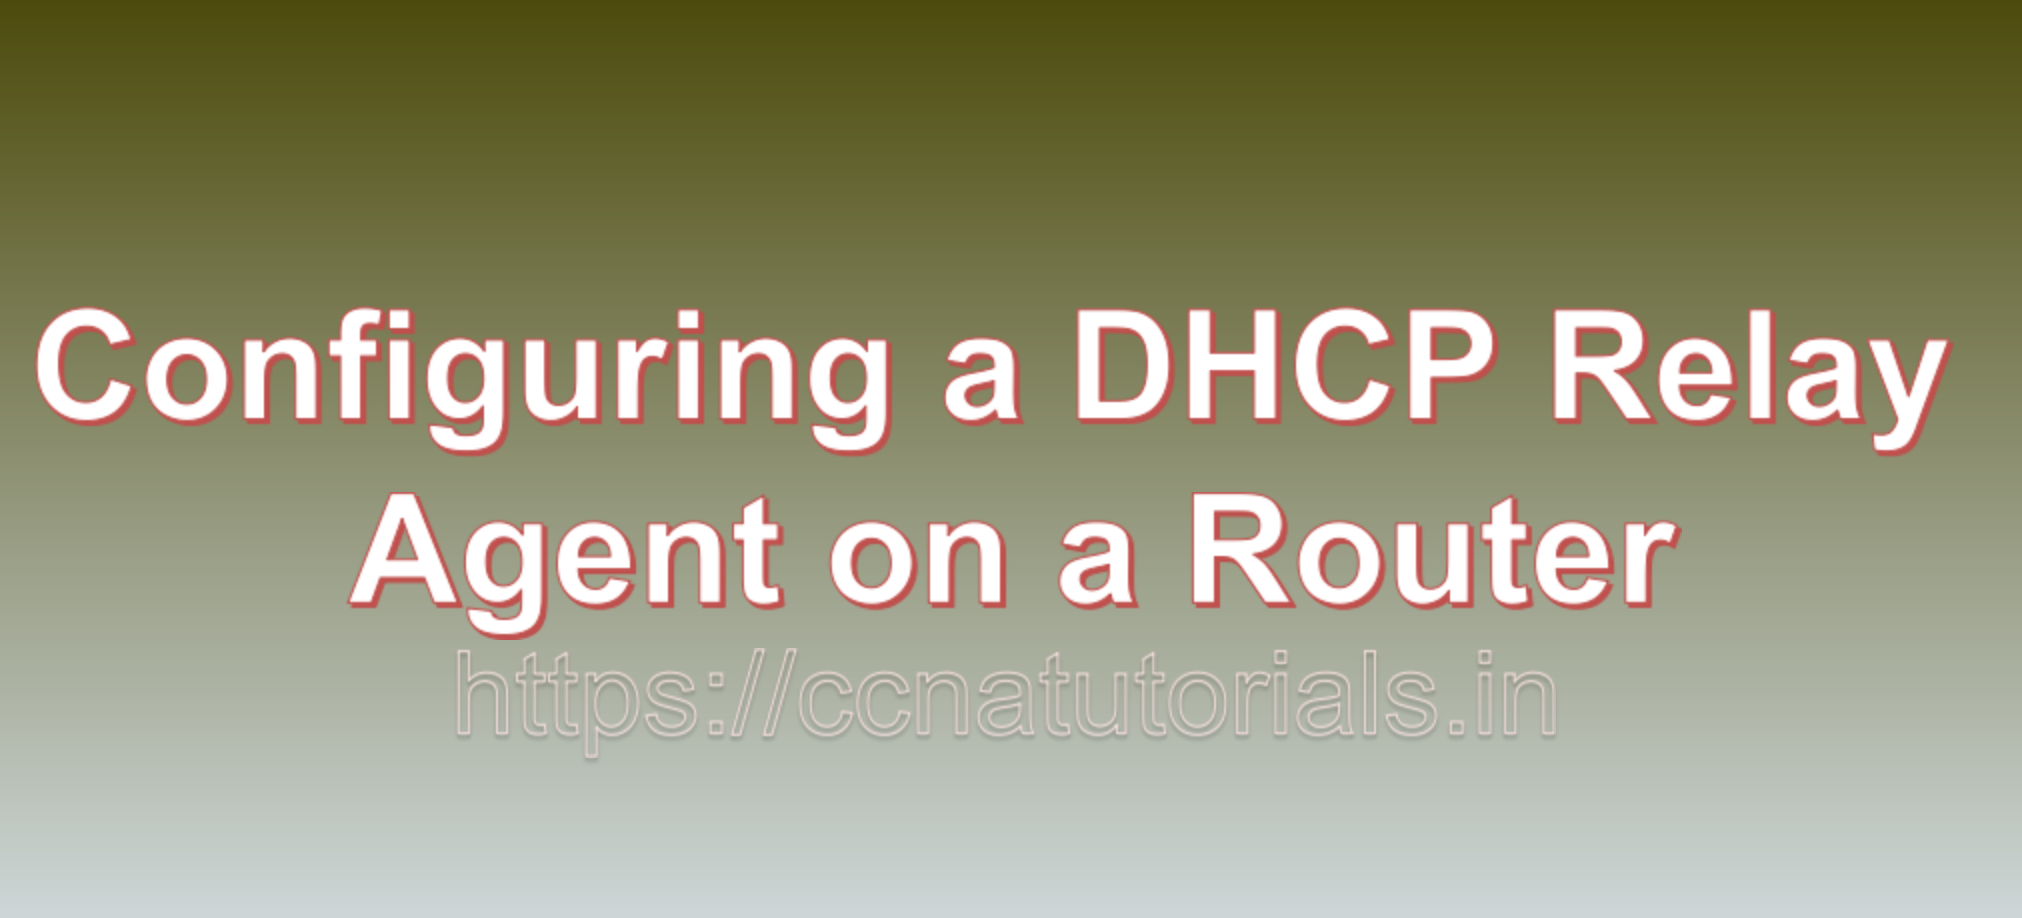 Configuring a DHCP Relay Agent on a Router, ccna, ccna tutorials